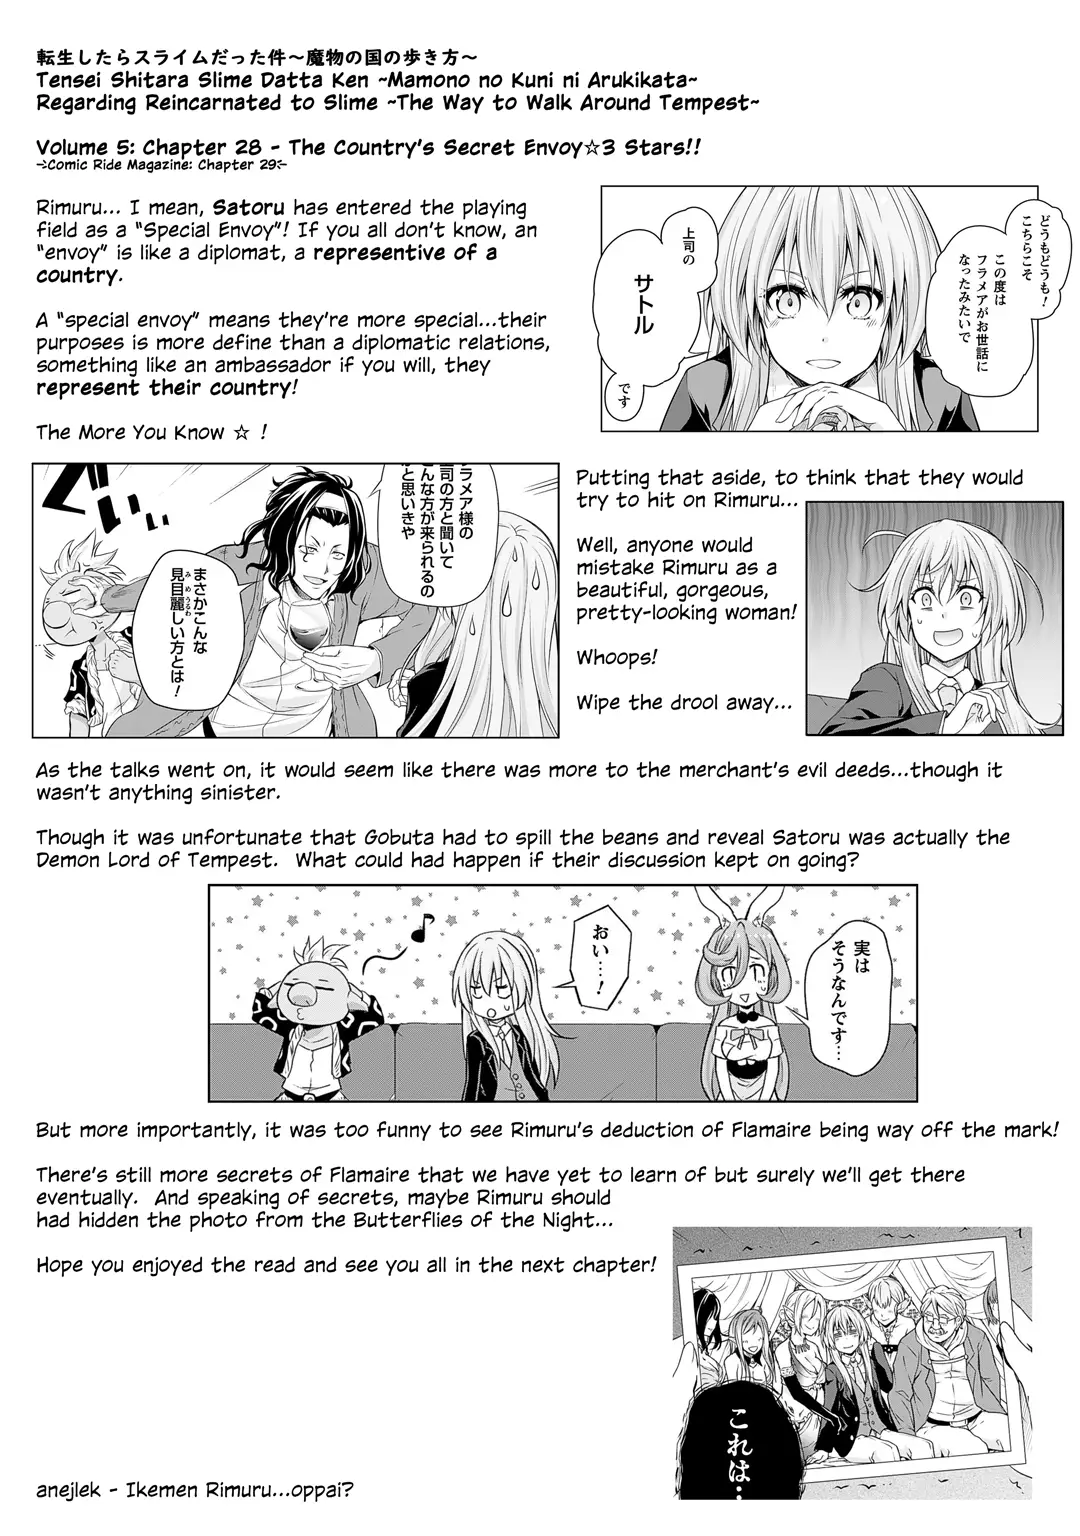 Tensei Shitara Slime Datta Ken: The Ways of Strolling in the Demon Country - 29 page 23